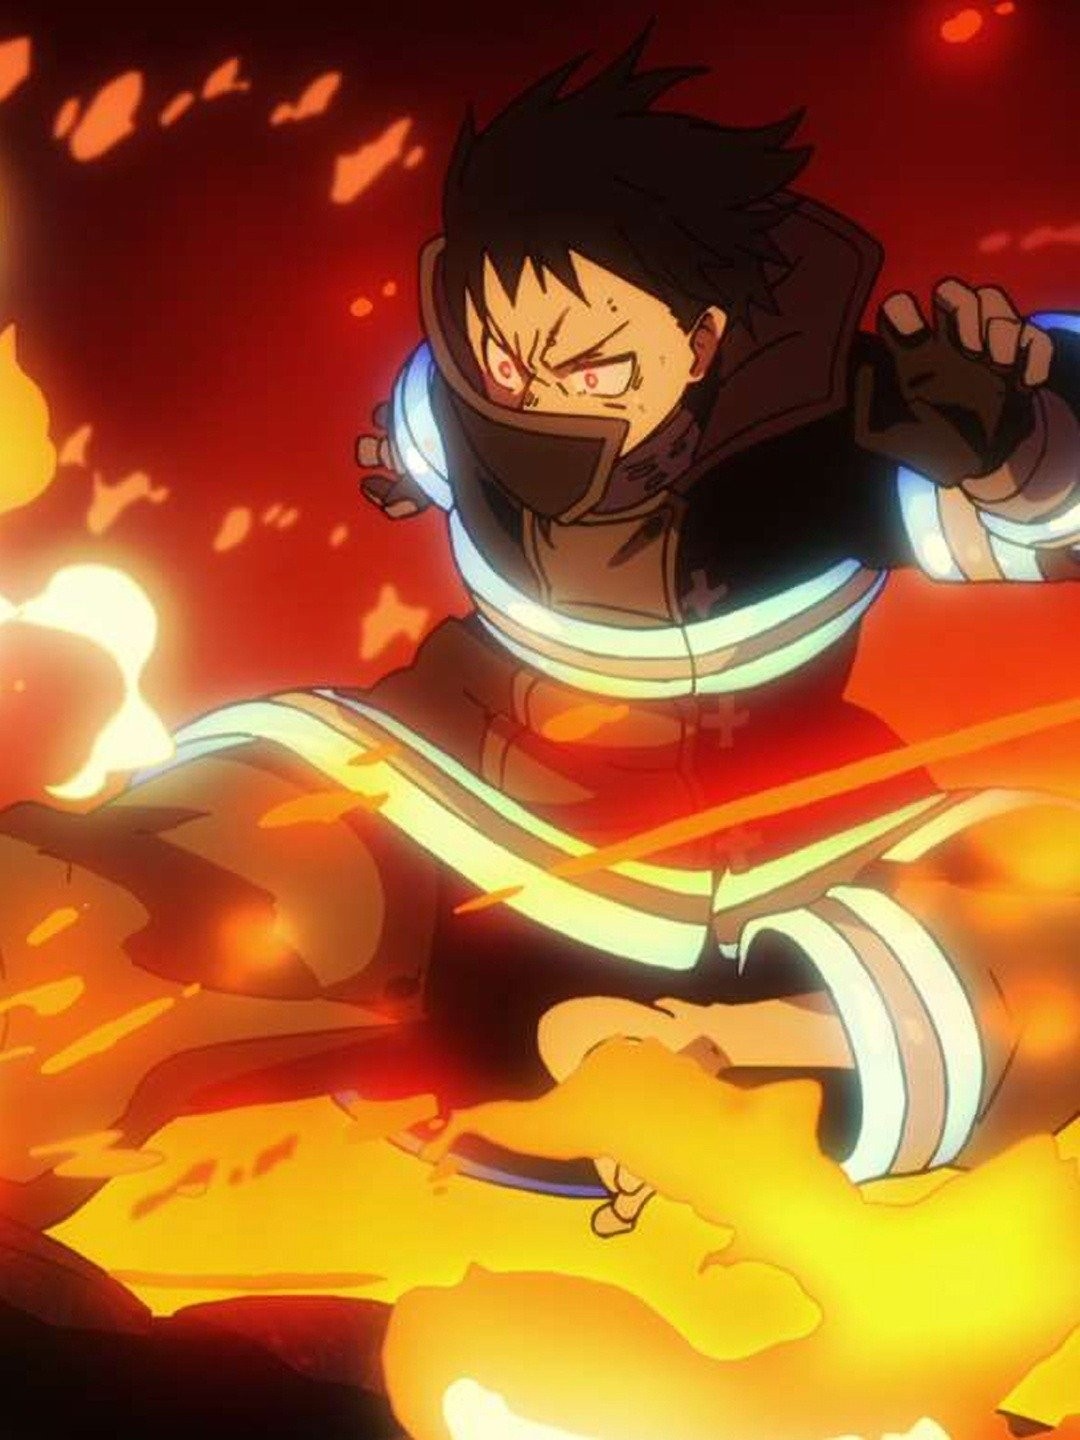 Anime: Fire Force Located: Season 1 Episode 22-24 Ratings: 7.7